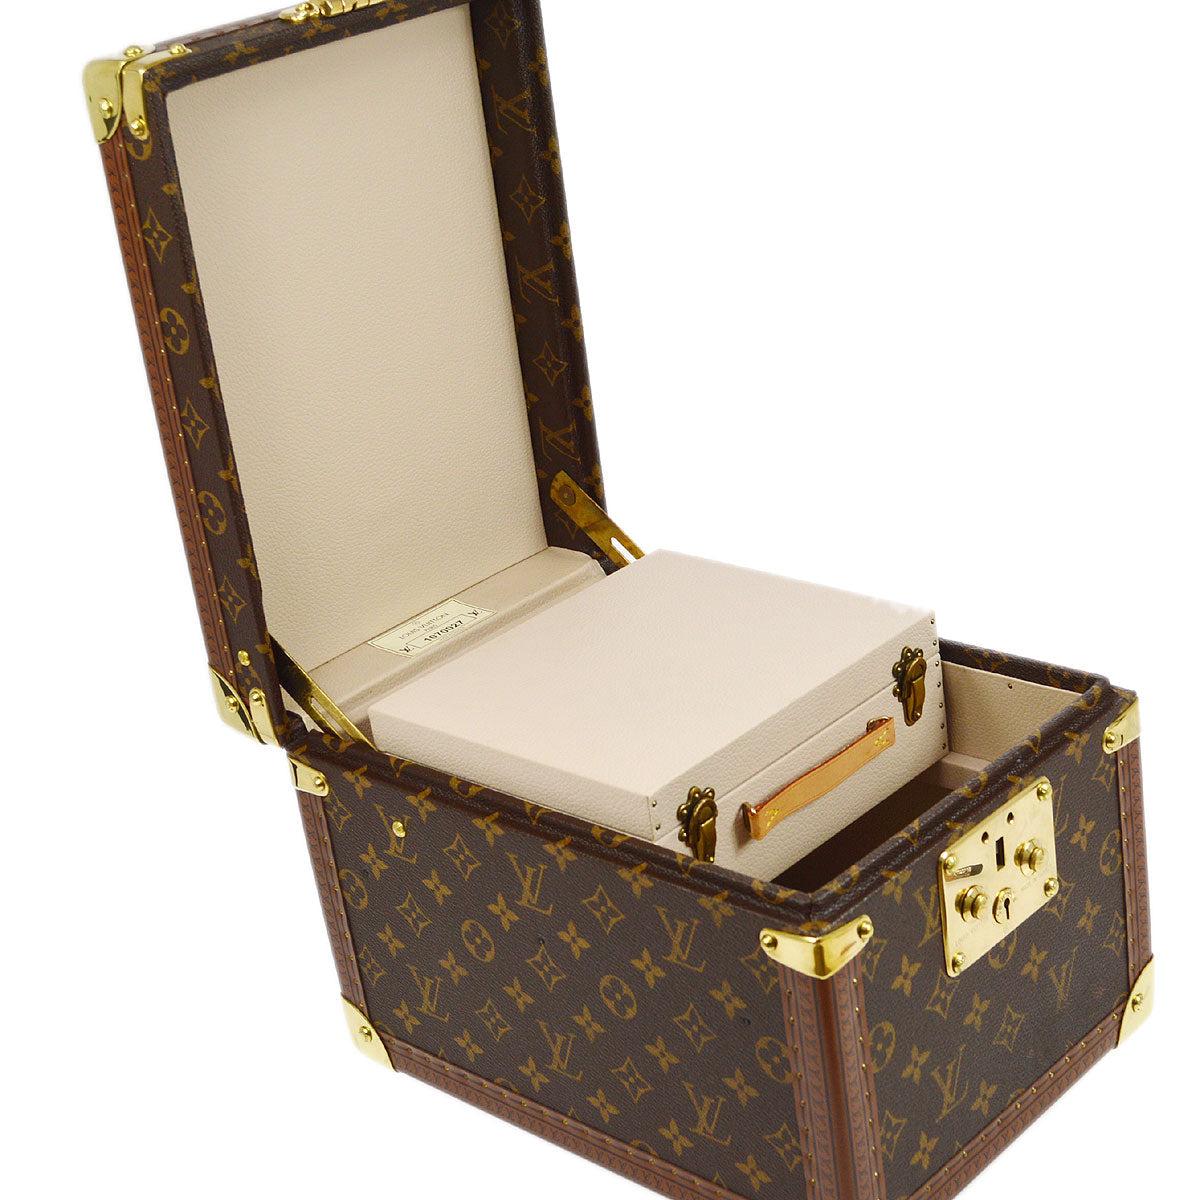 LOUIS VUITTON Monogram Canvas Cosmetic Vanity Travel Trunk Case In Good Condition For Sale In Chicago, IL